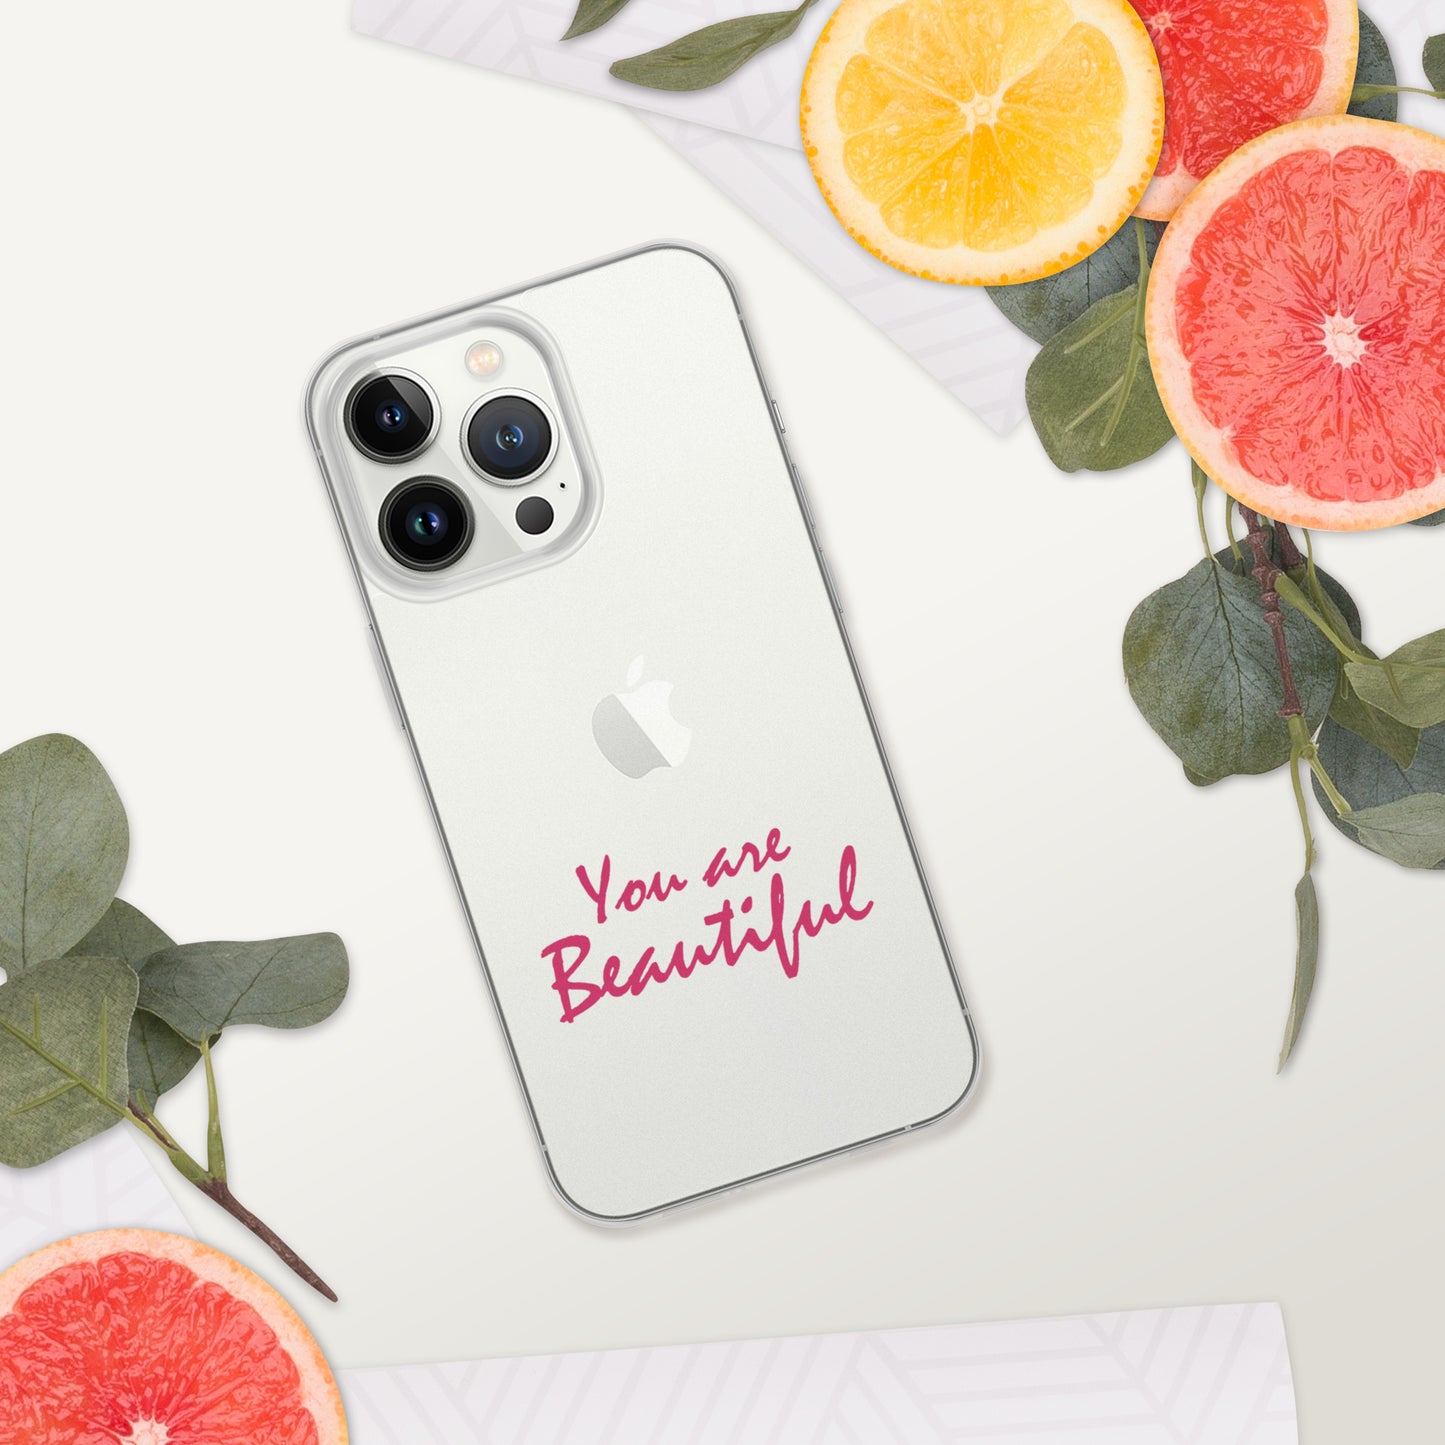 You Are Beautiful | iPhone Case